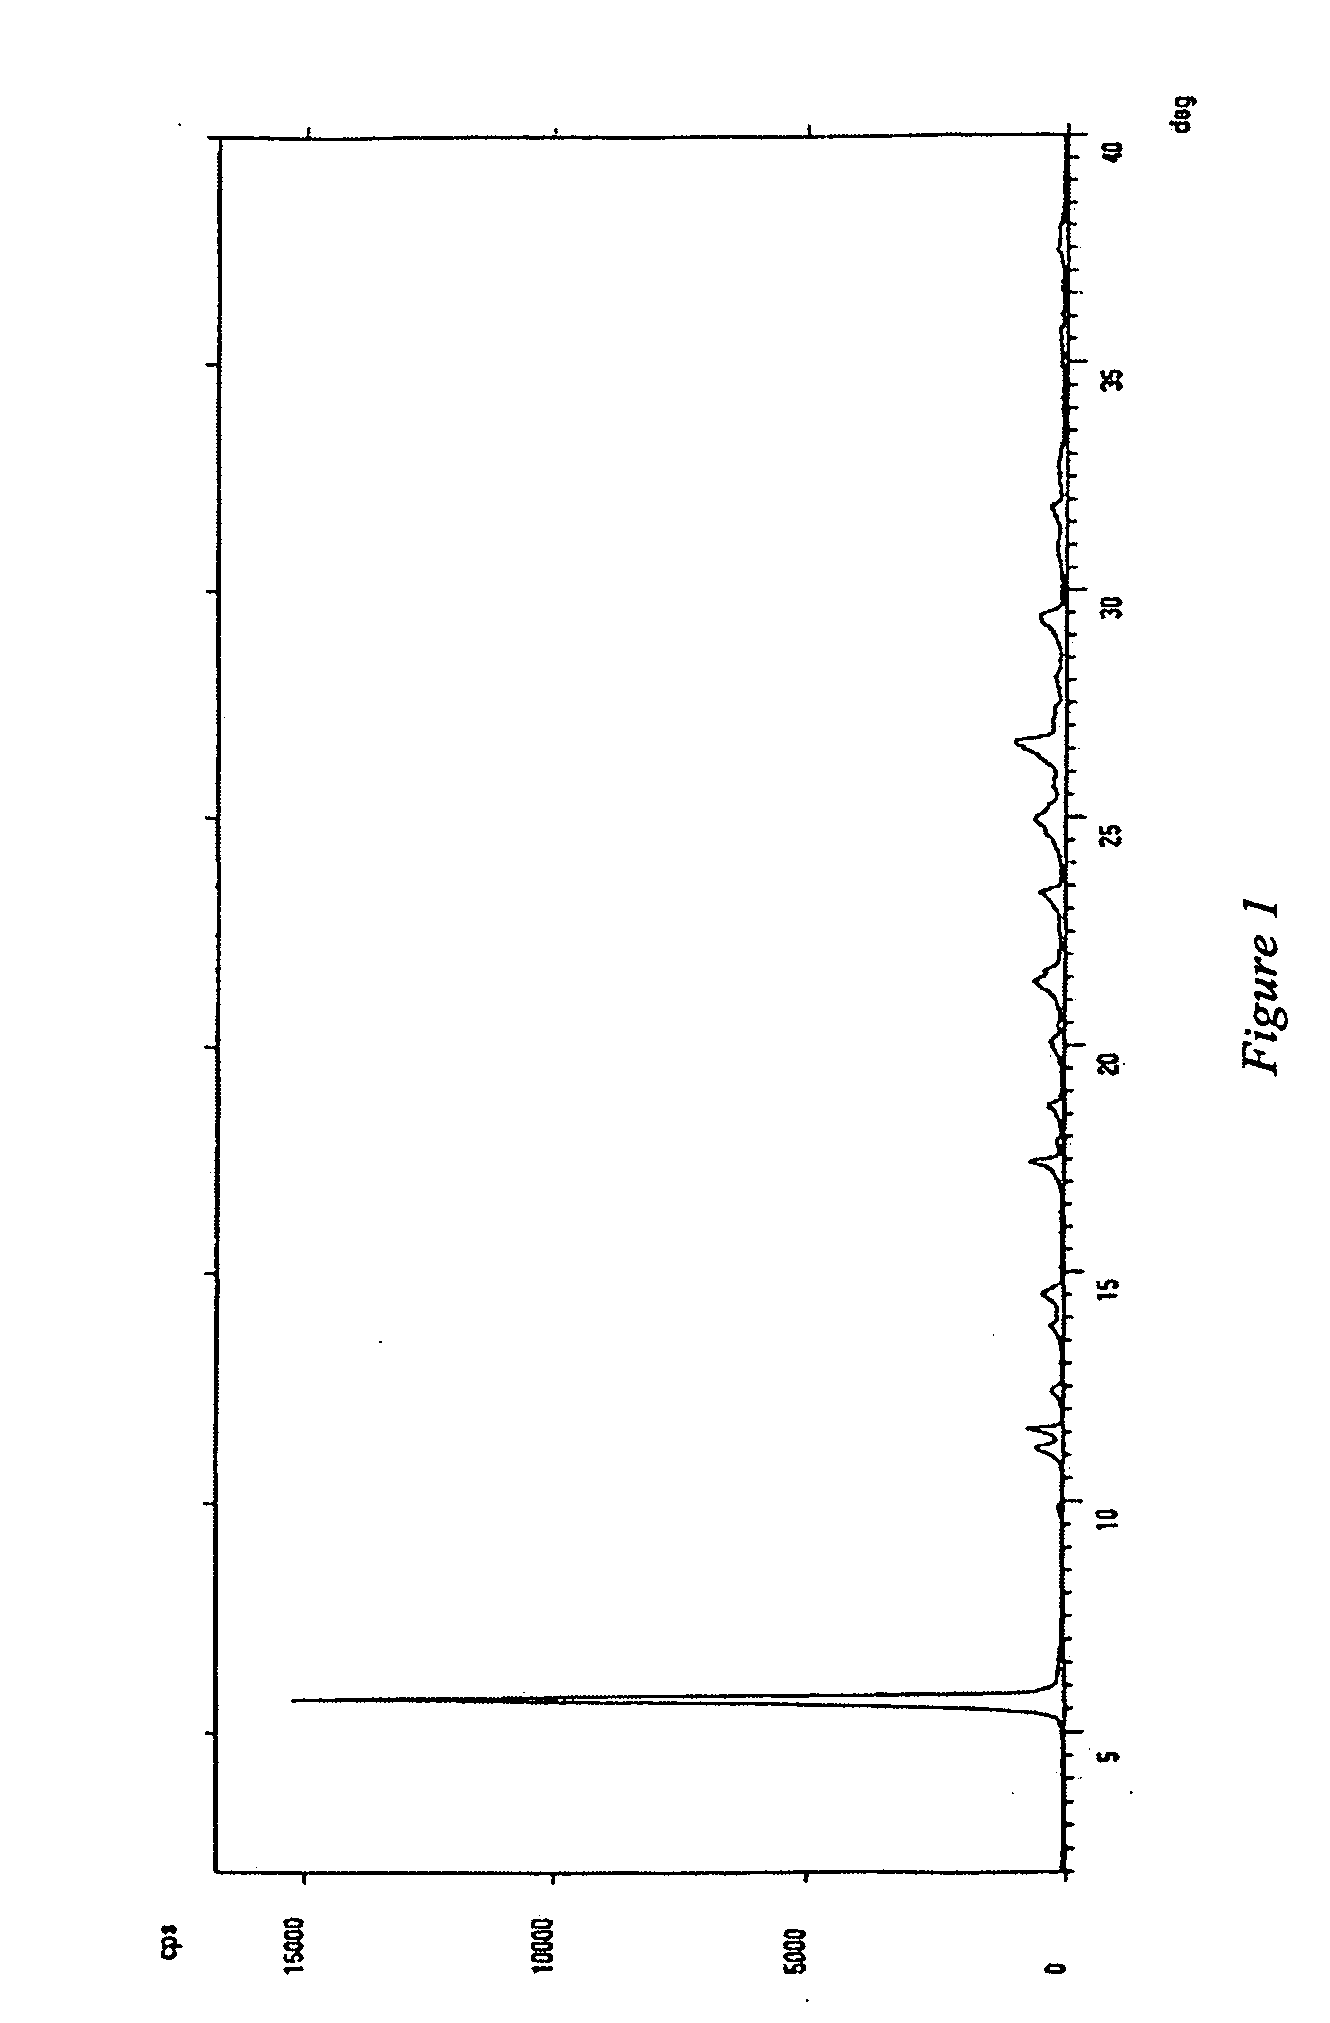 Process for the purification of imiquimod